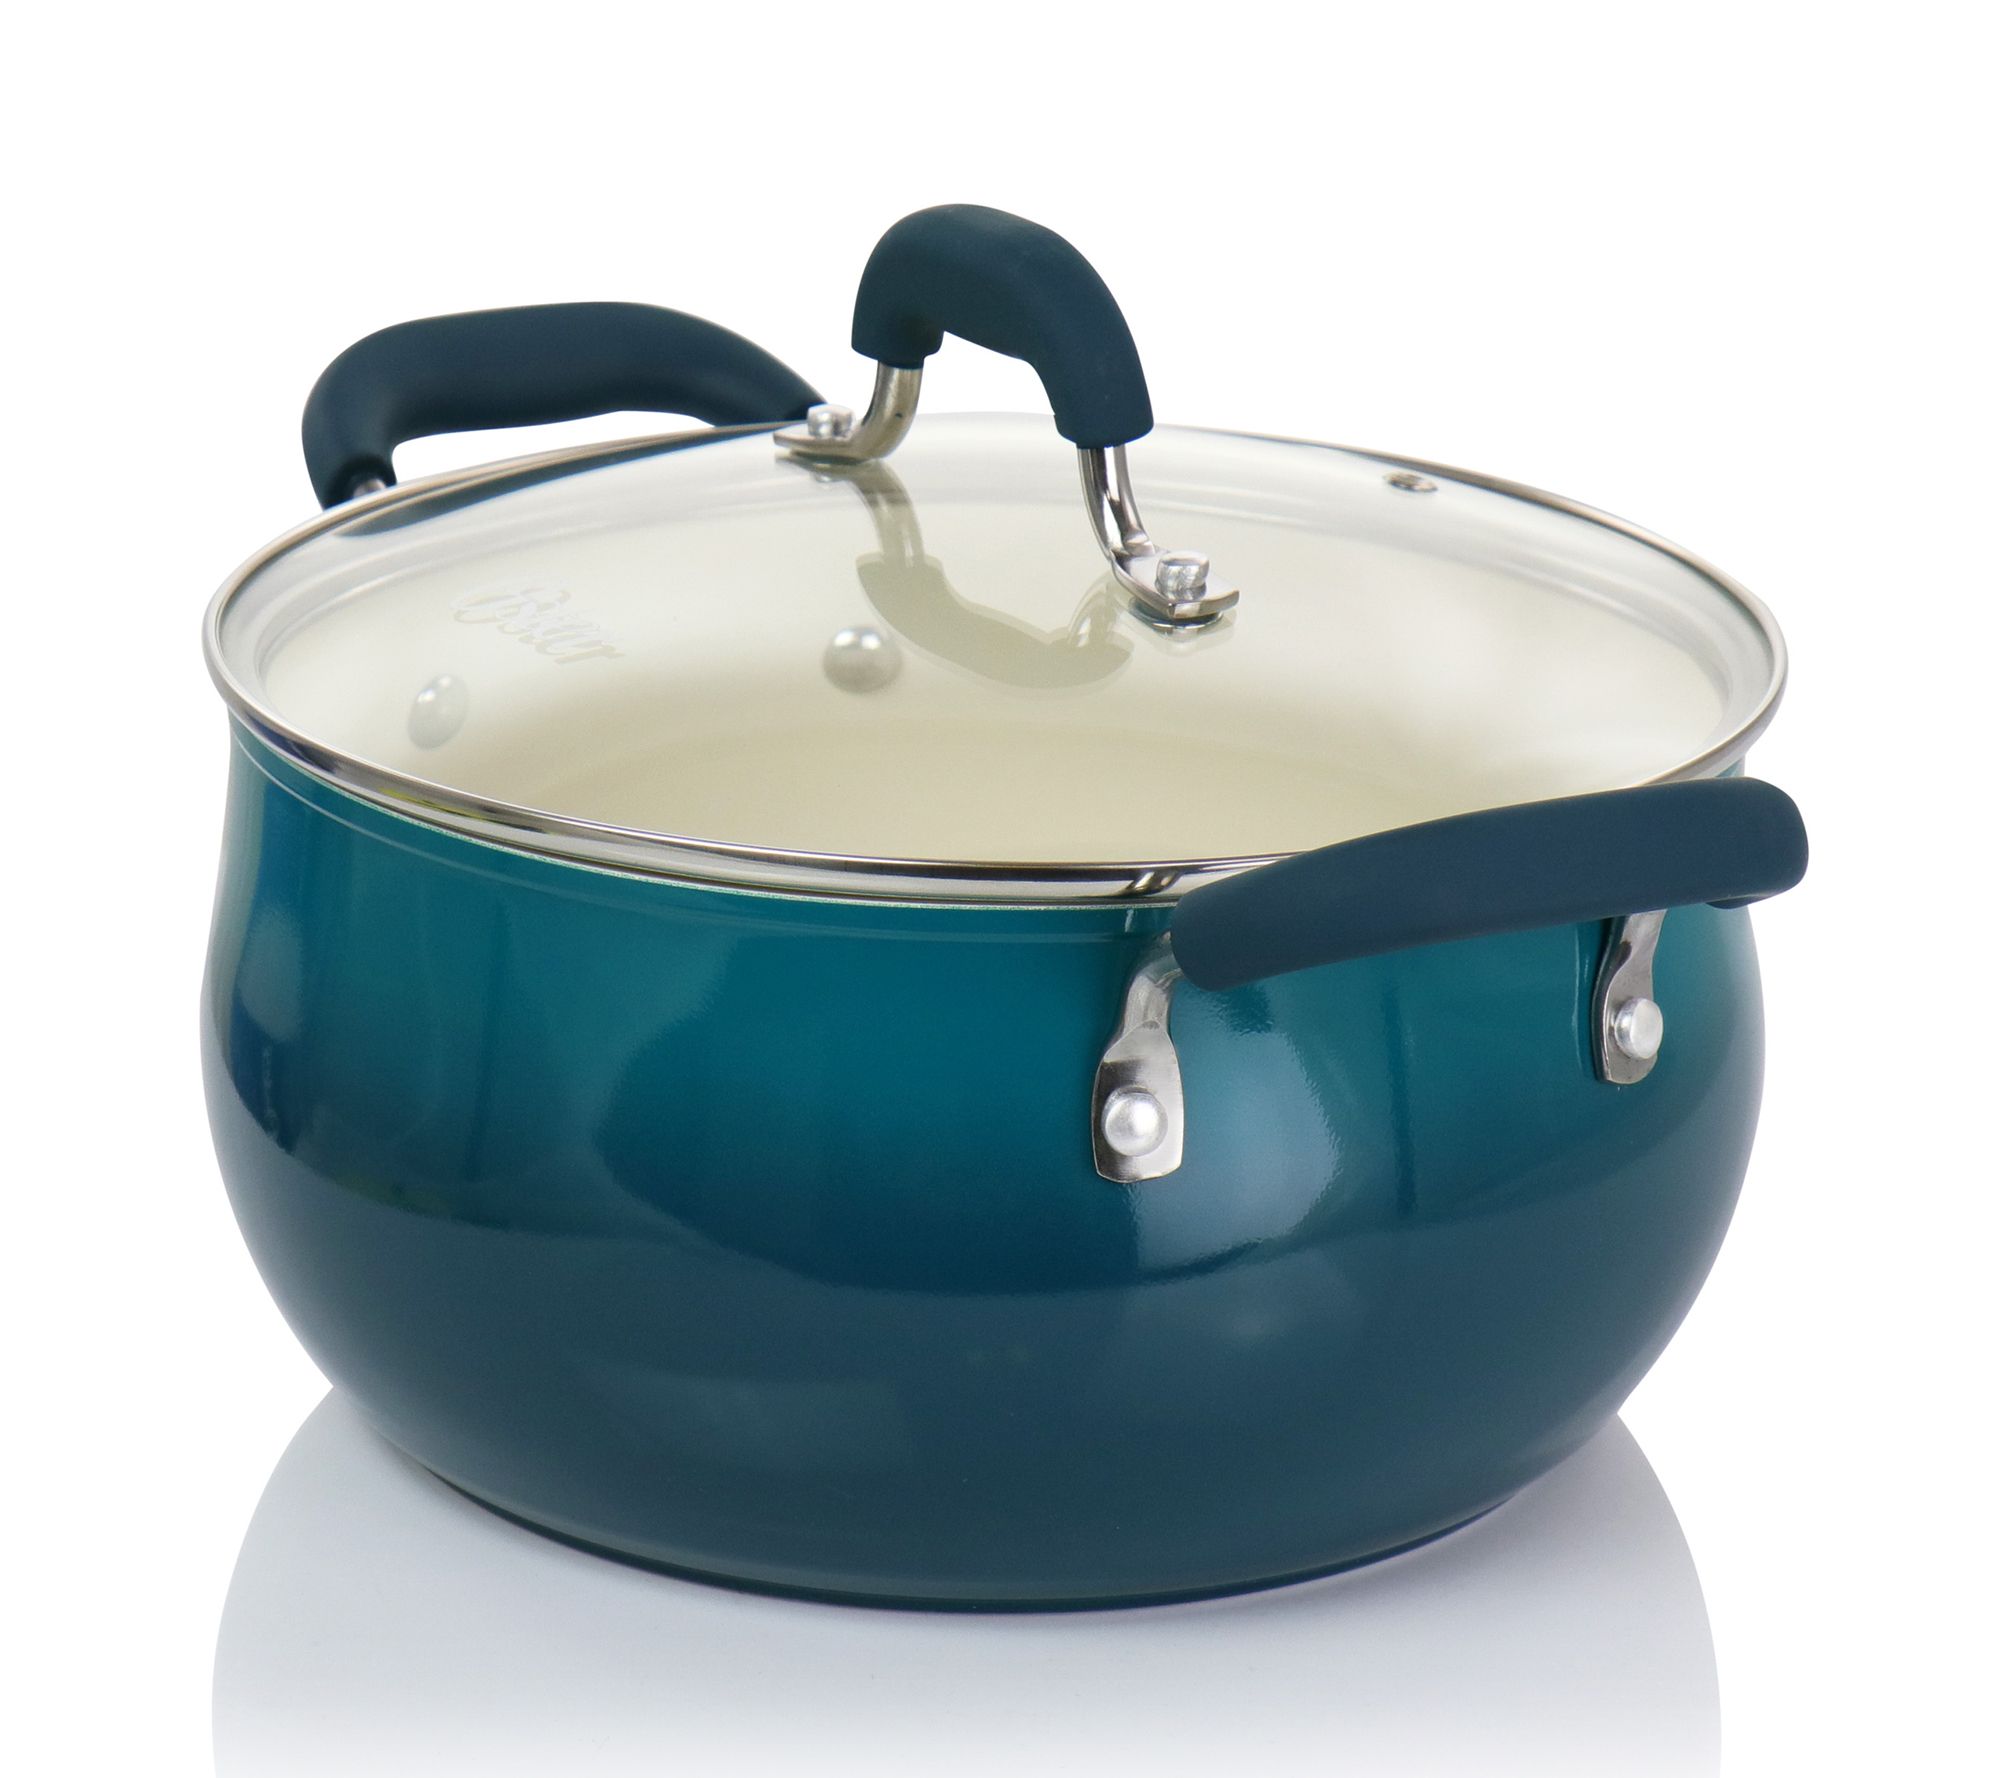 Oster Anetta 5 qt. Nonstick Aluminum Dutch Oven with Lid in Navy